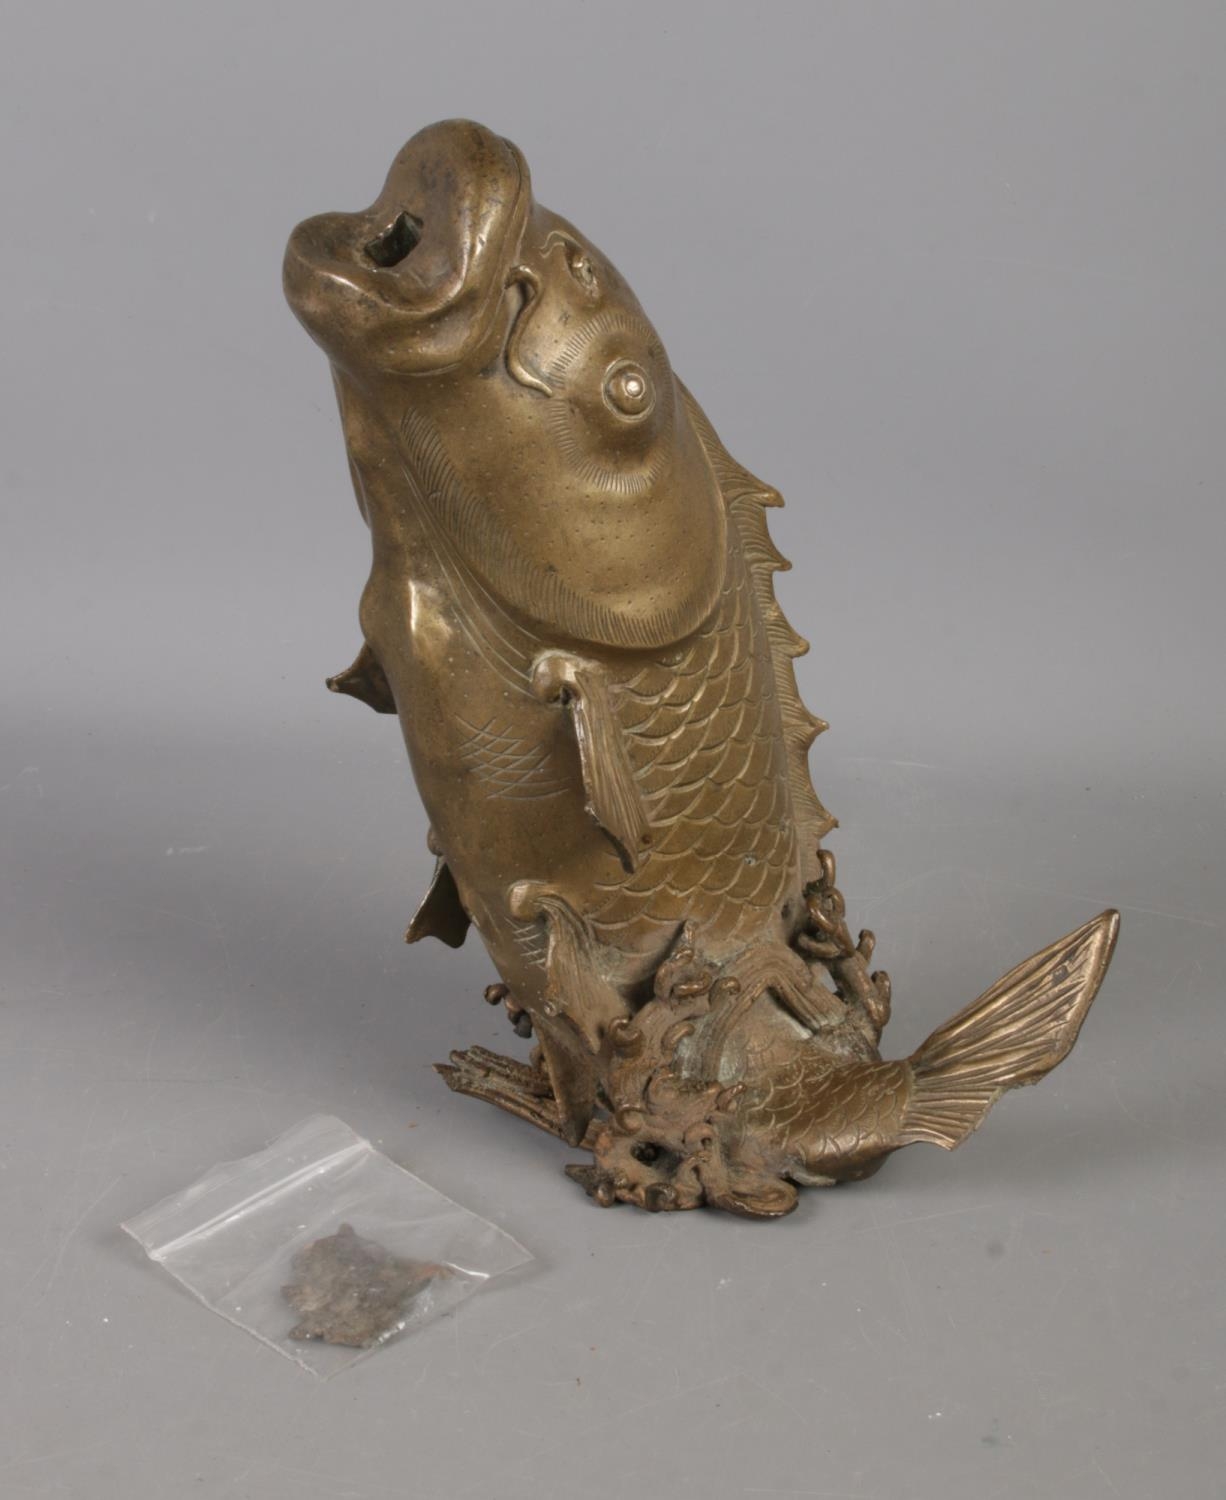 A bronze figure of a leaping carp. Portion of tail is missing with some damage to body and water